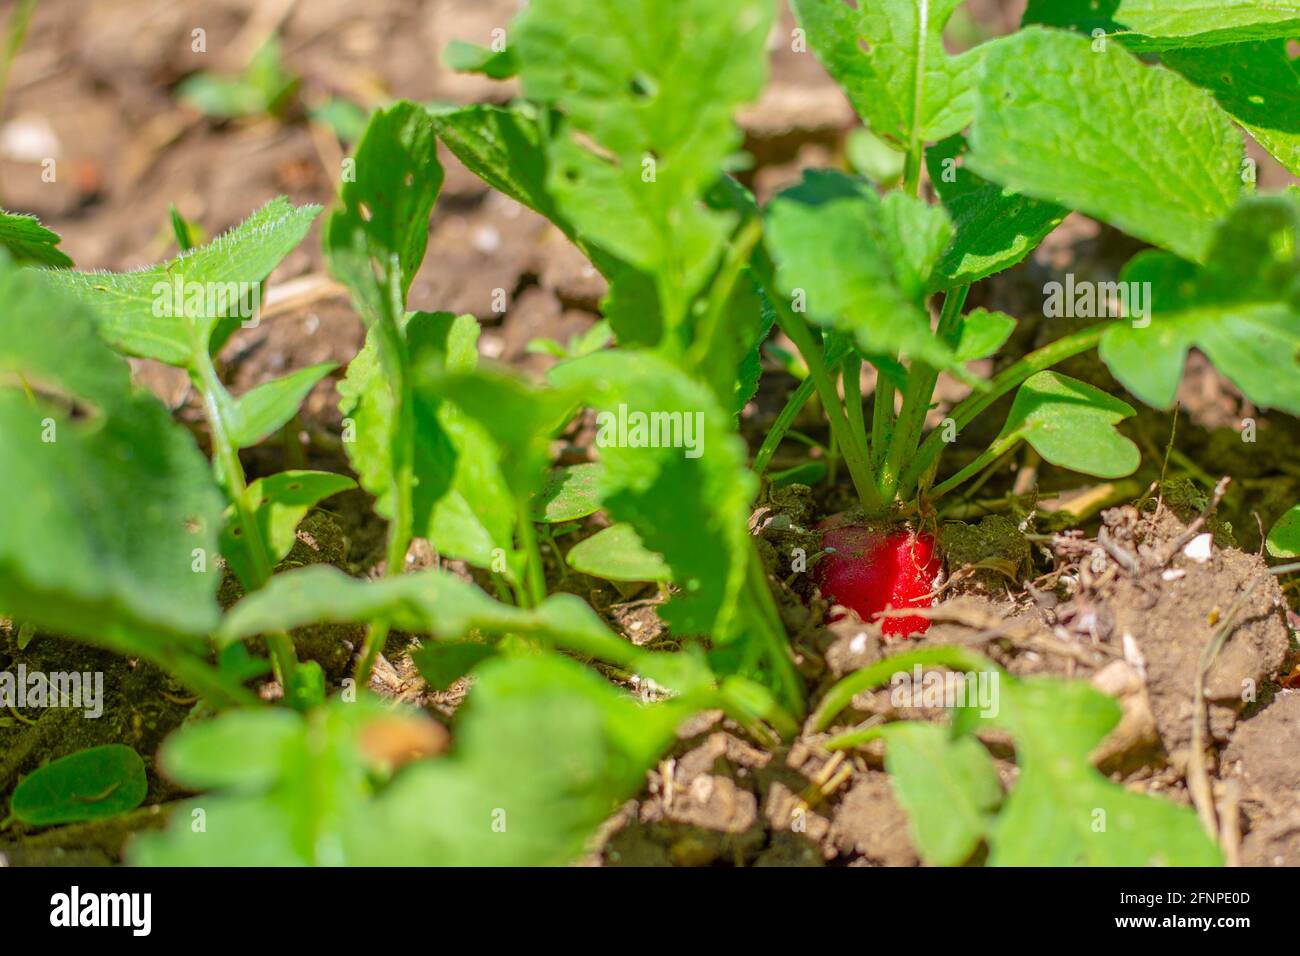 Young red radish grows in the garden bed. Growing tasty healthy root vegetables. Stock Photo